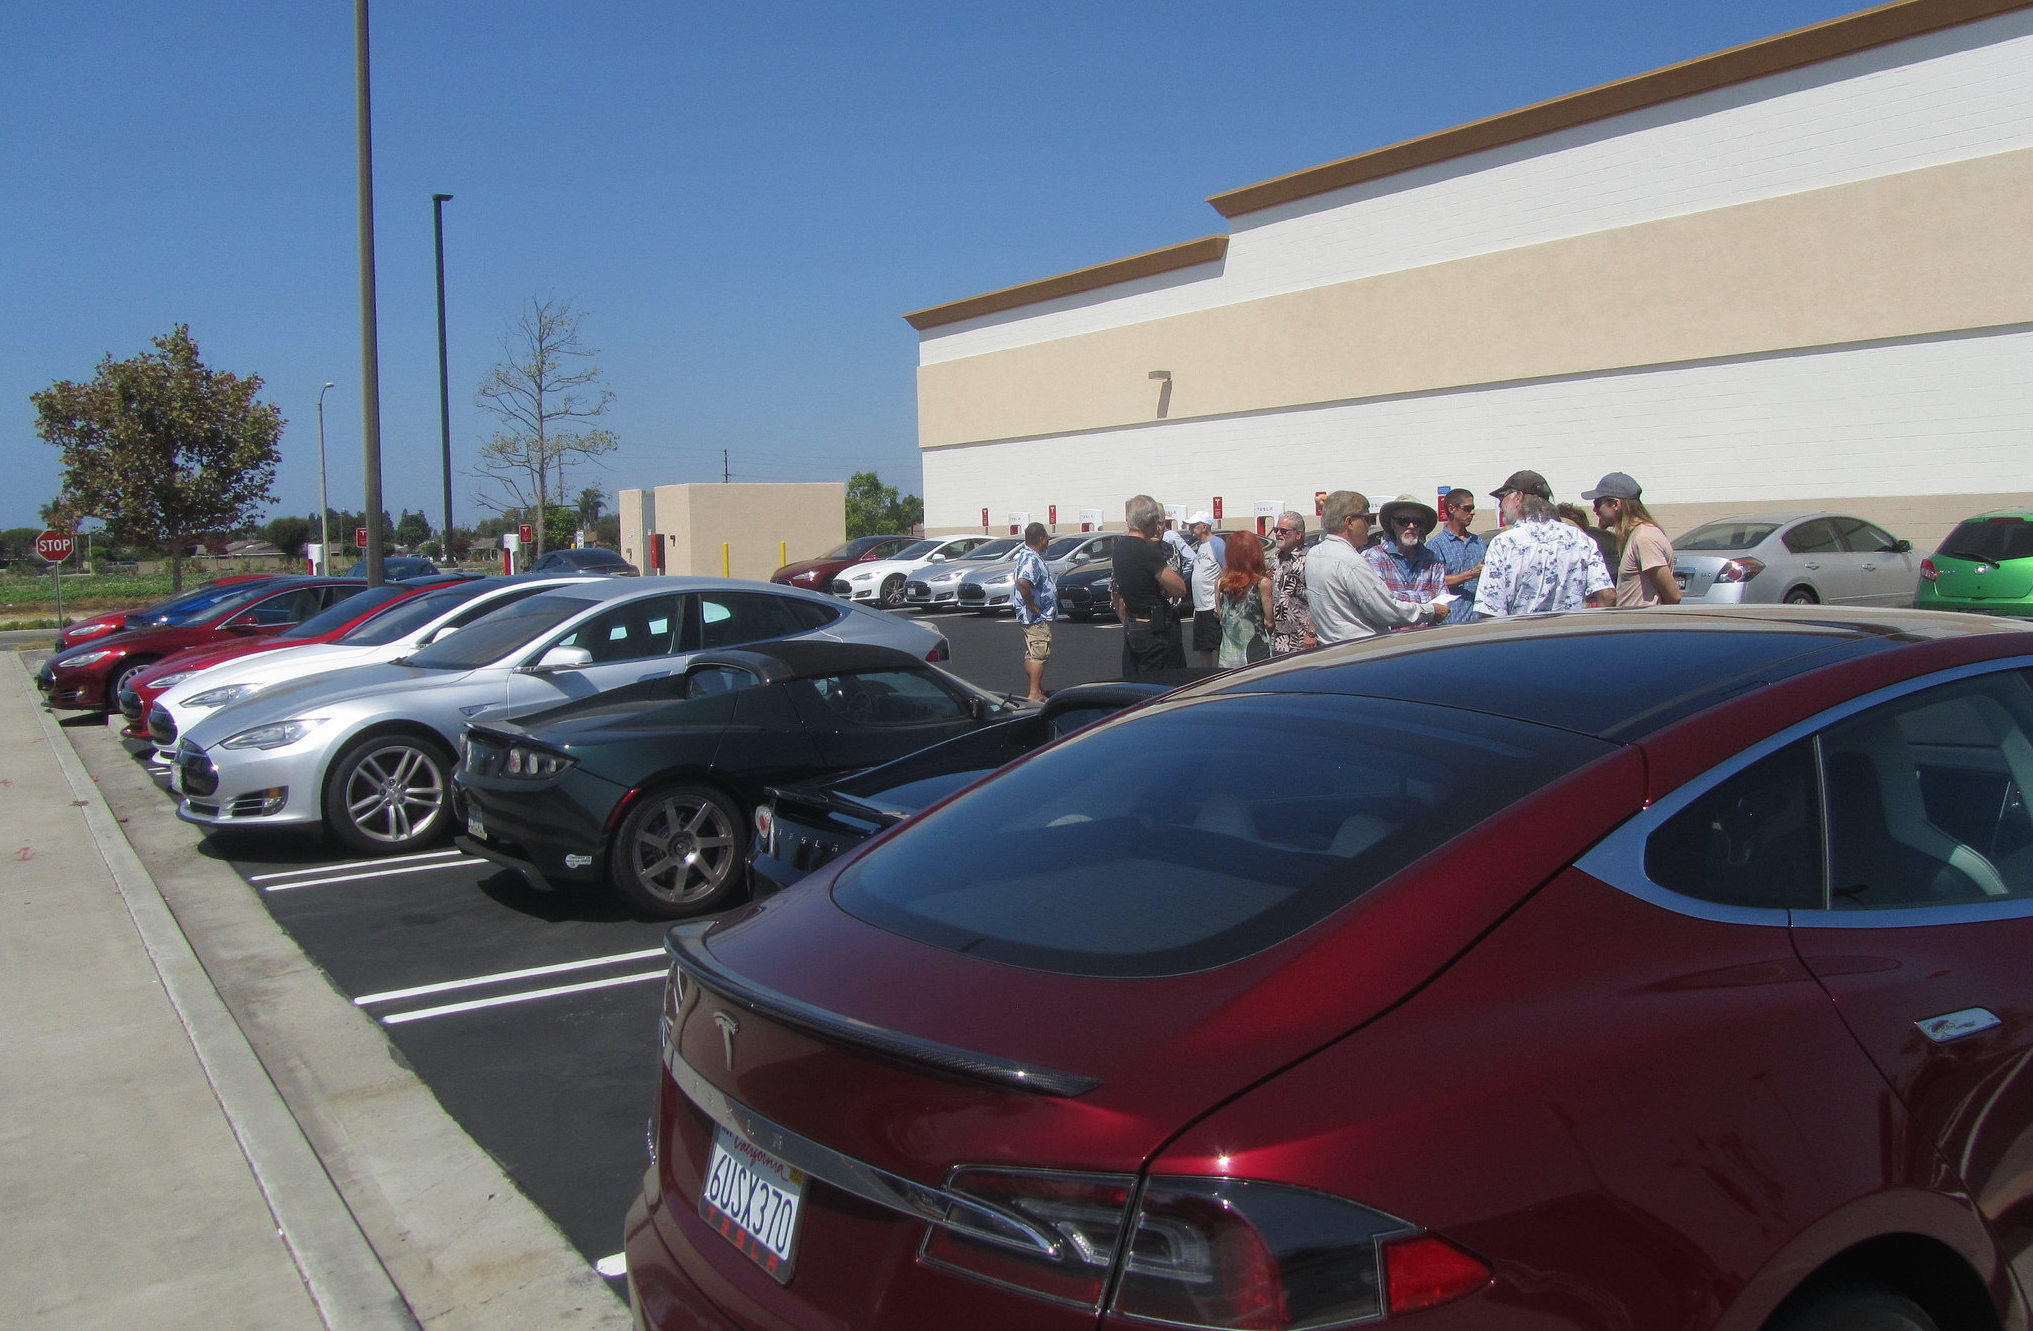 How to Unplug from a Tesla Supercharger: Tips and Common Issues Resolved